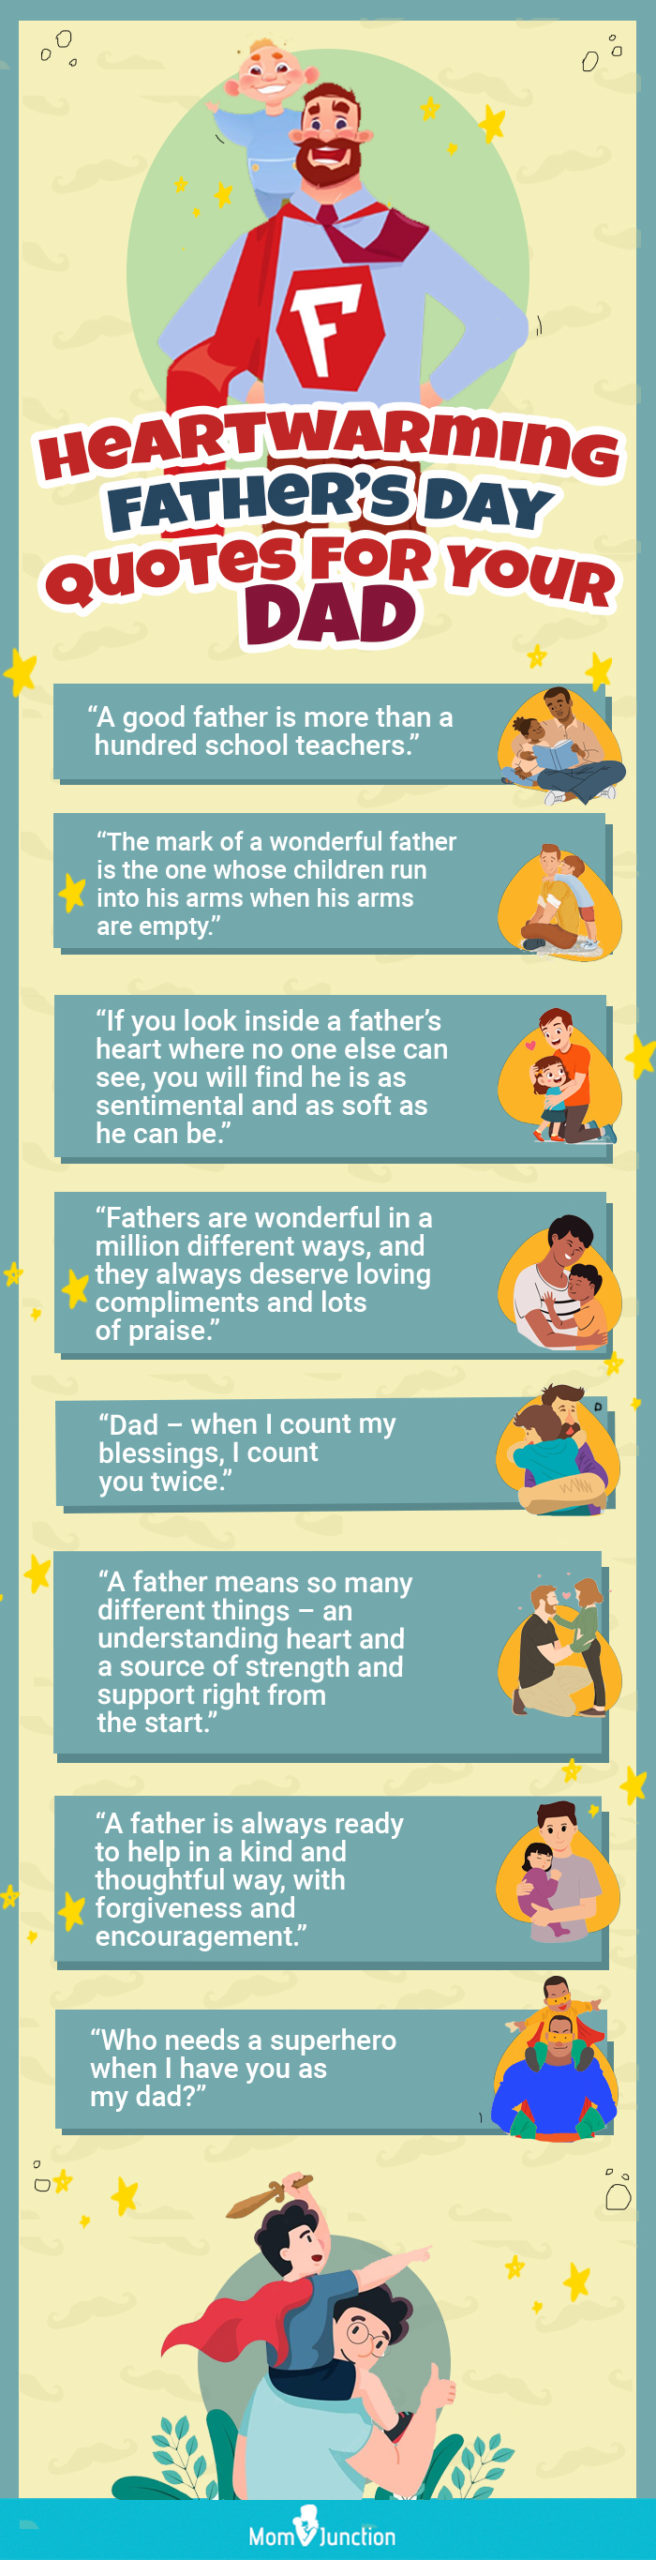 heartwarming fathers day quotes for your dad [infographic]